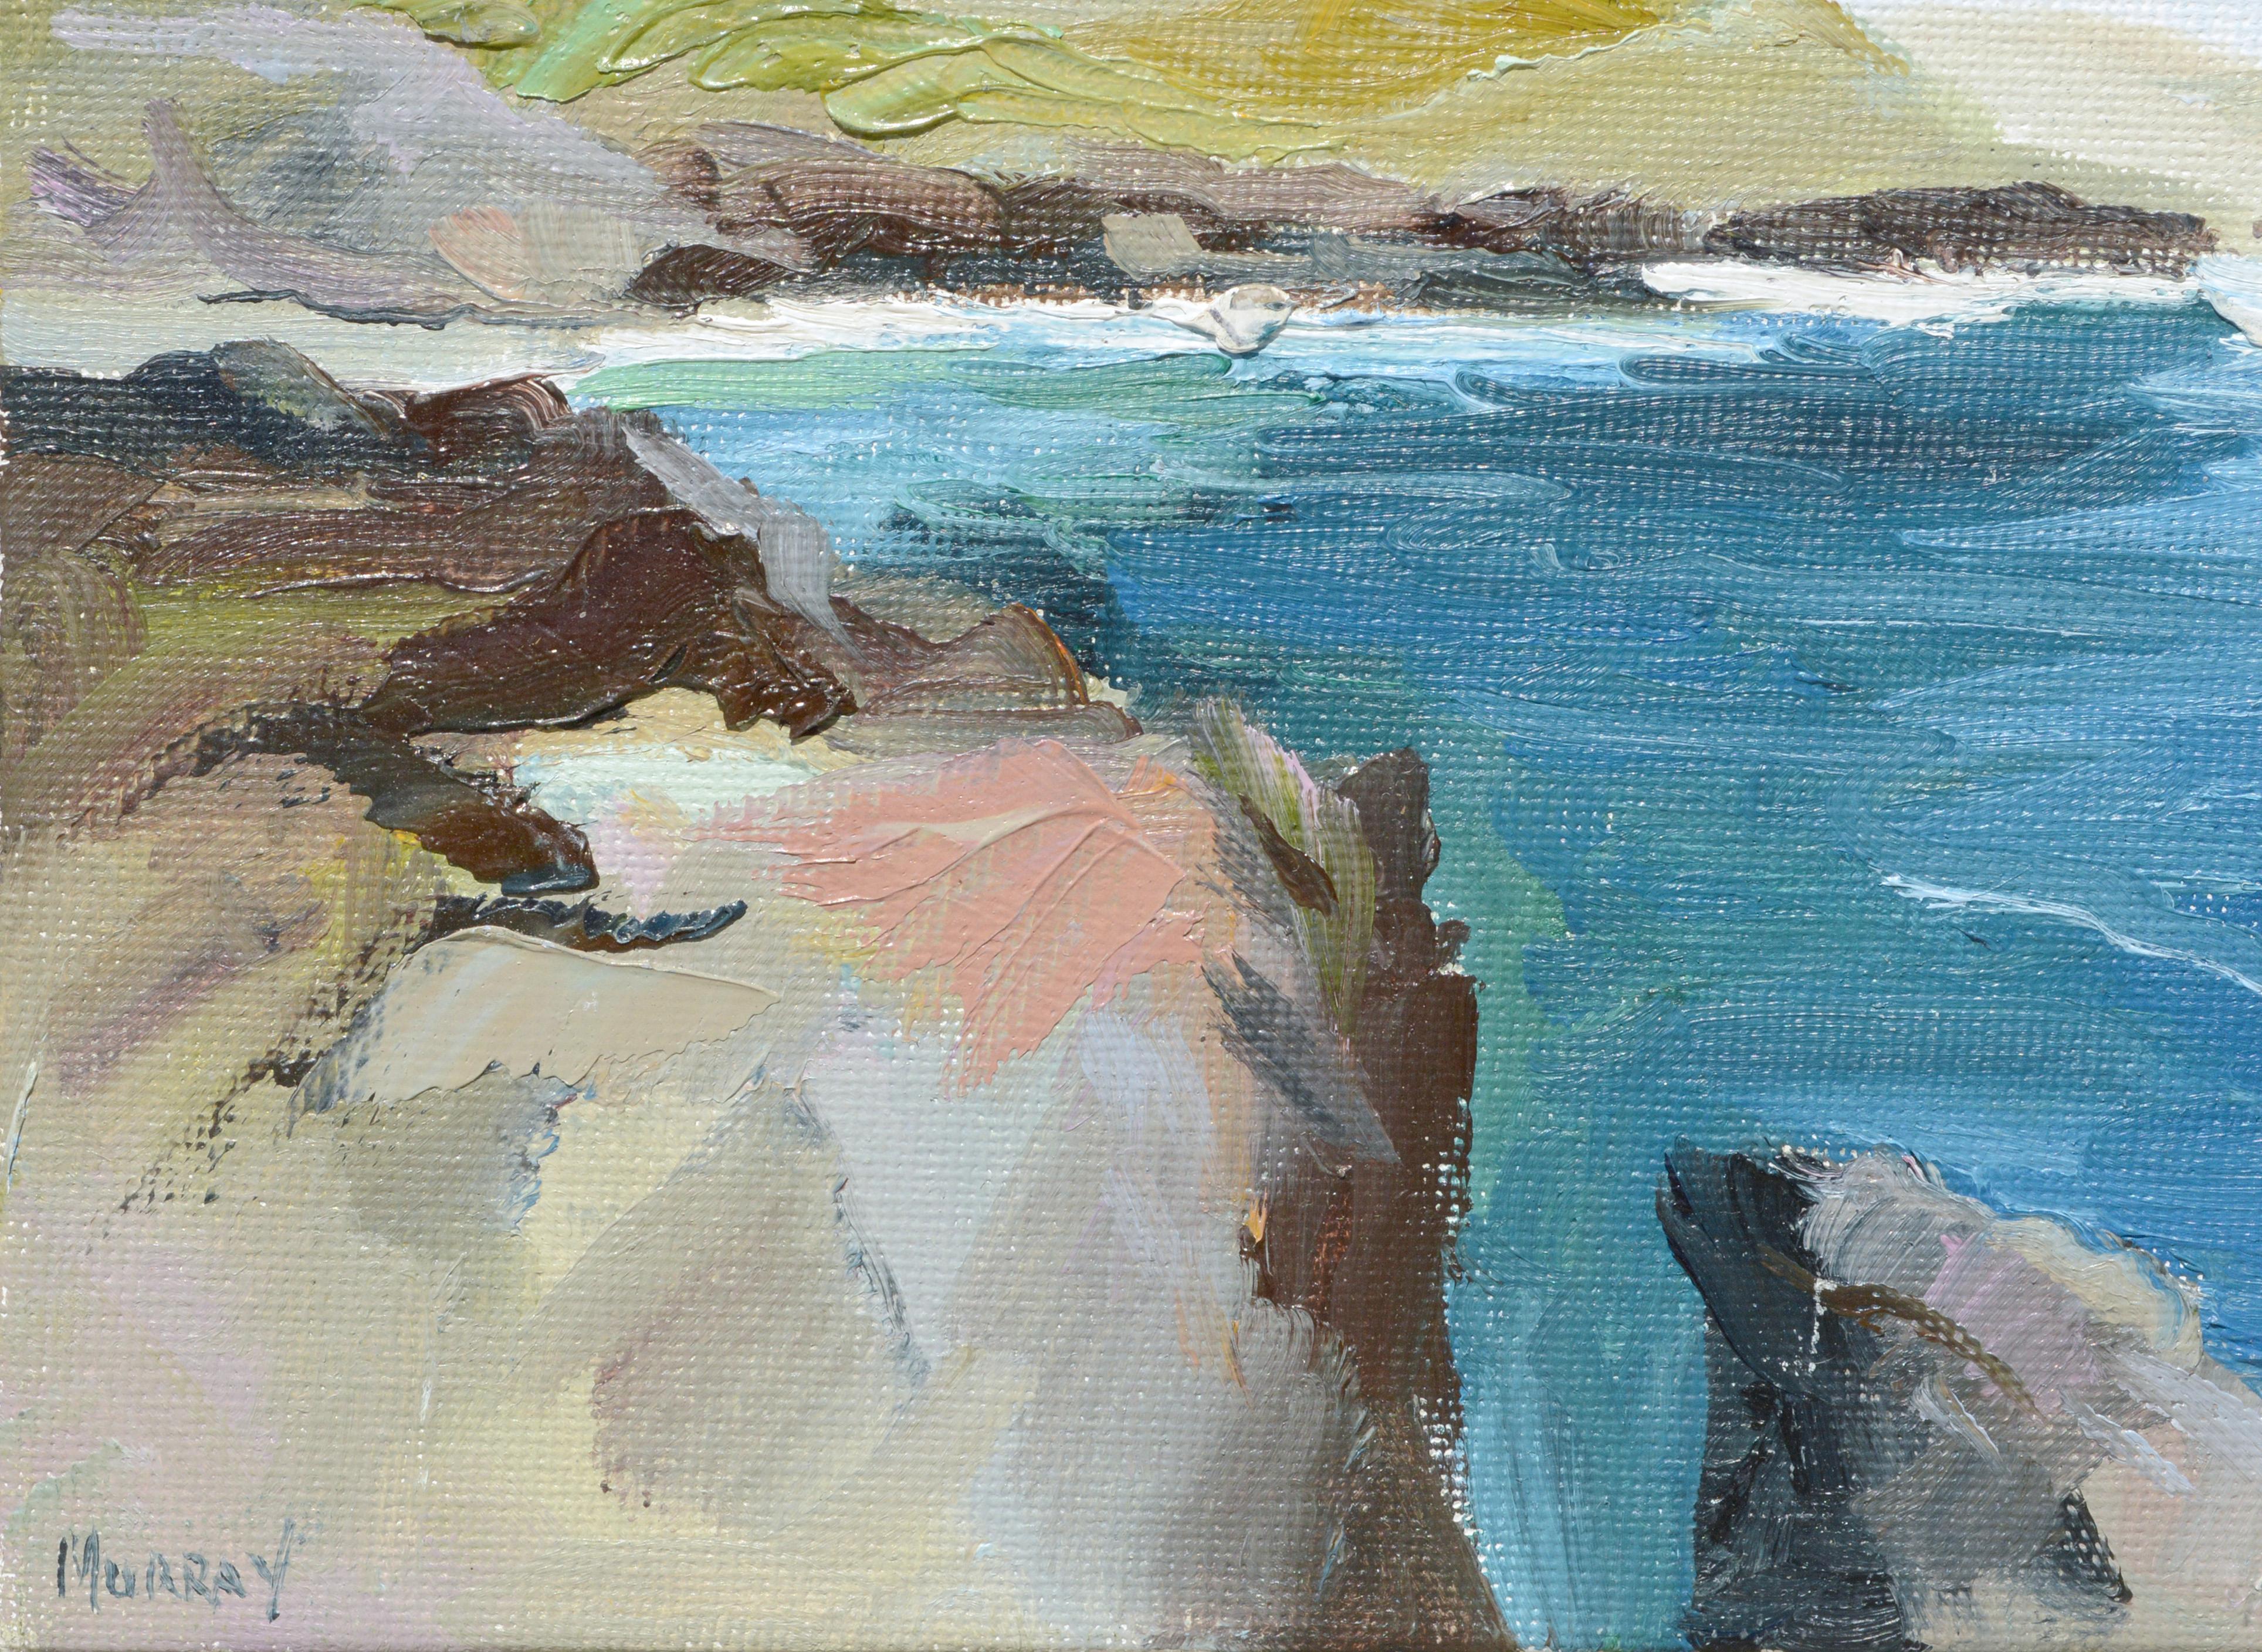 Miniature landscape of the Big Sur coast by Kathleen Murray (American, b. 1958). 